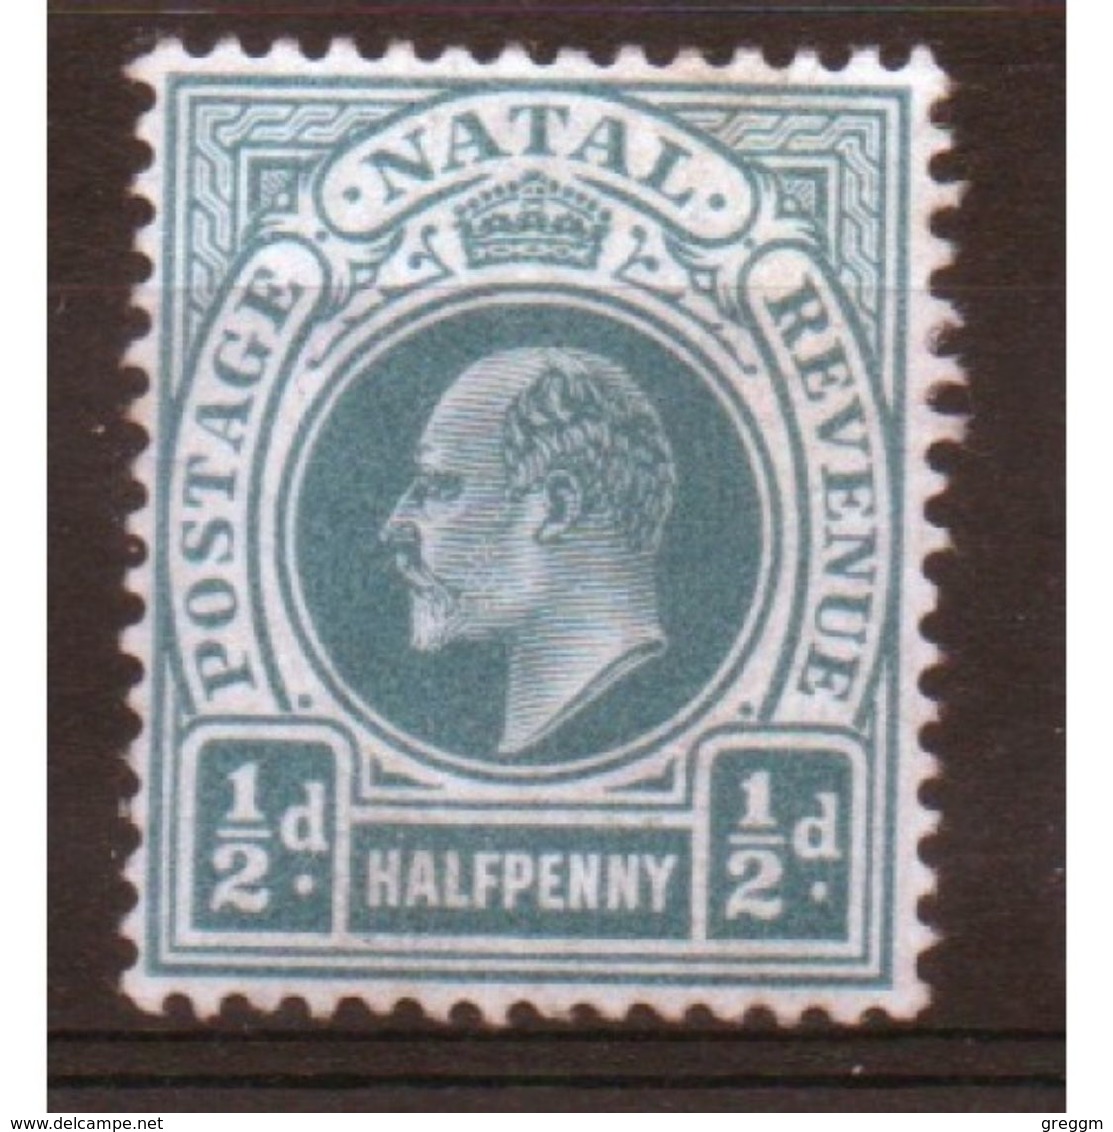 Natal Edward VII  ½d Stamp From 1902.  This Stamp Is Catalogue Number 127 And Is In Mounted Mint Condition. - Natal (1857-1909)